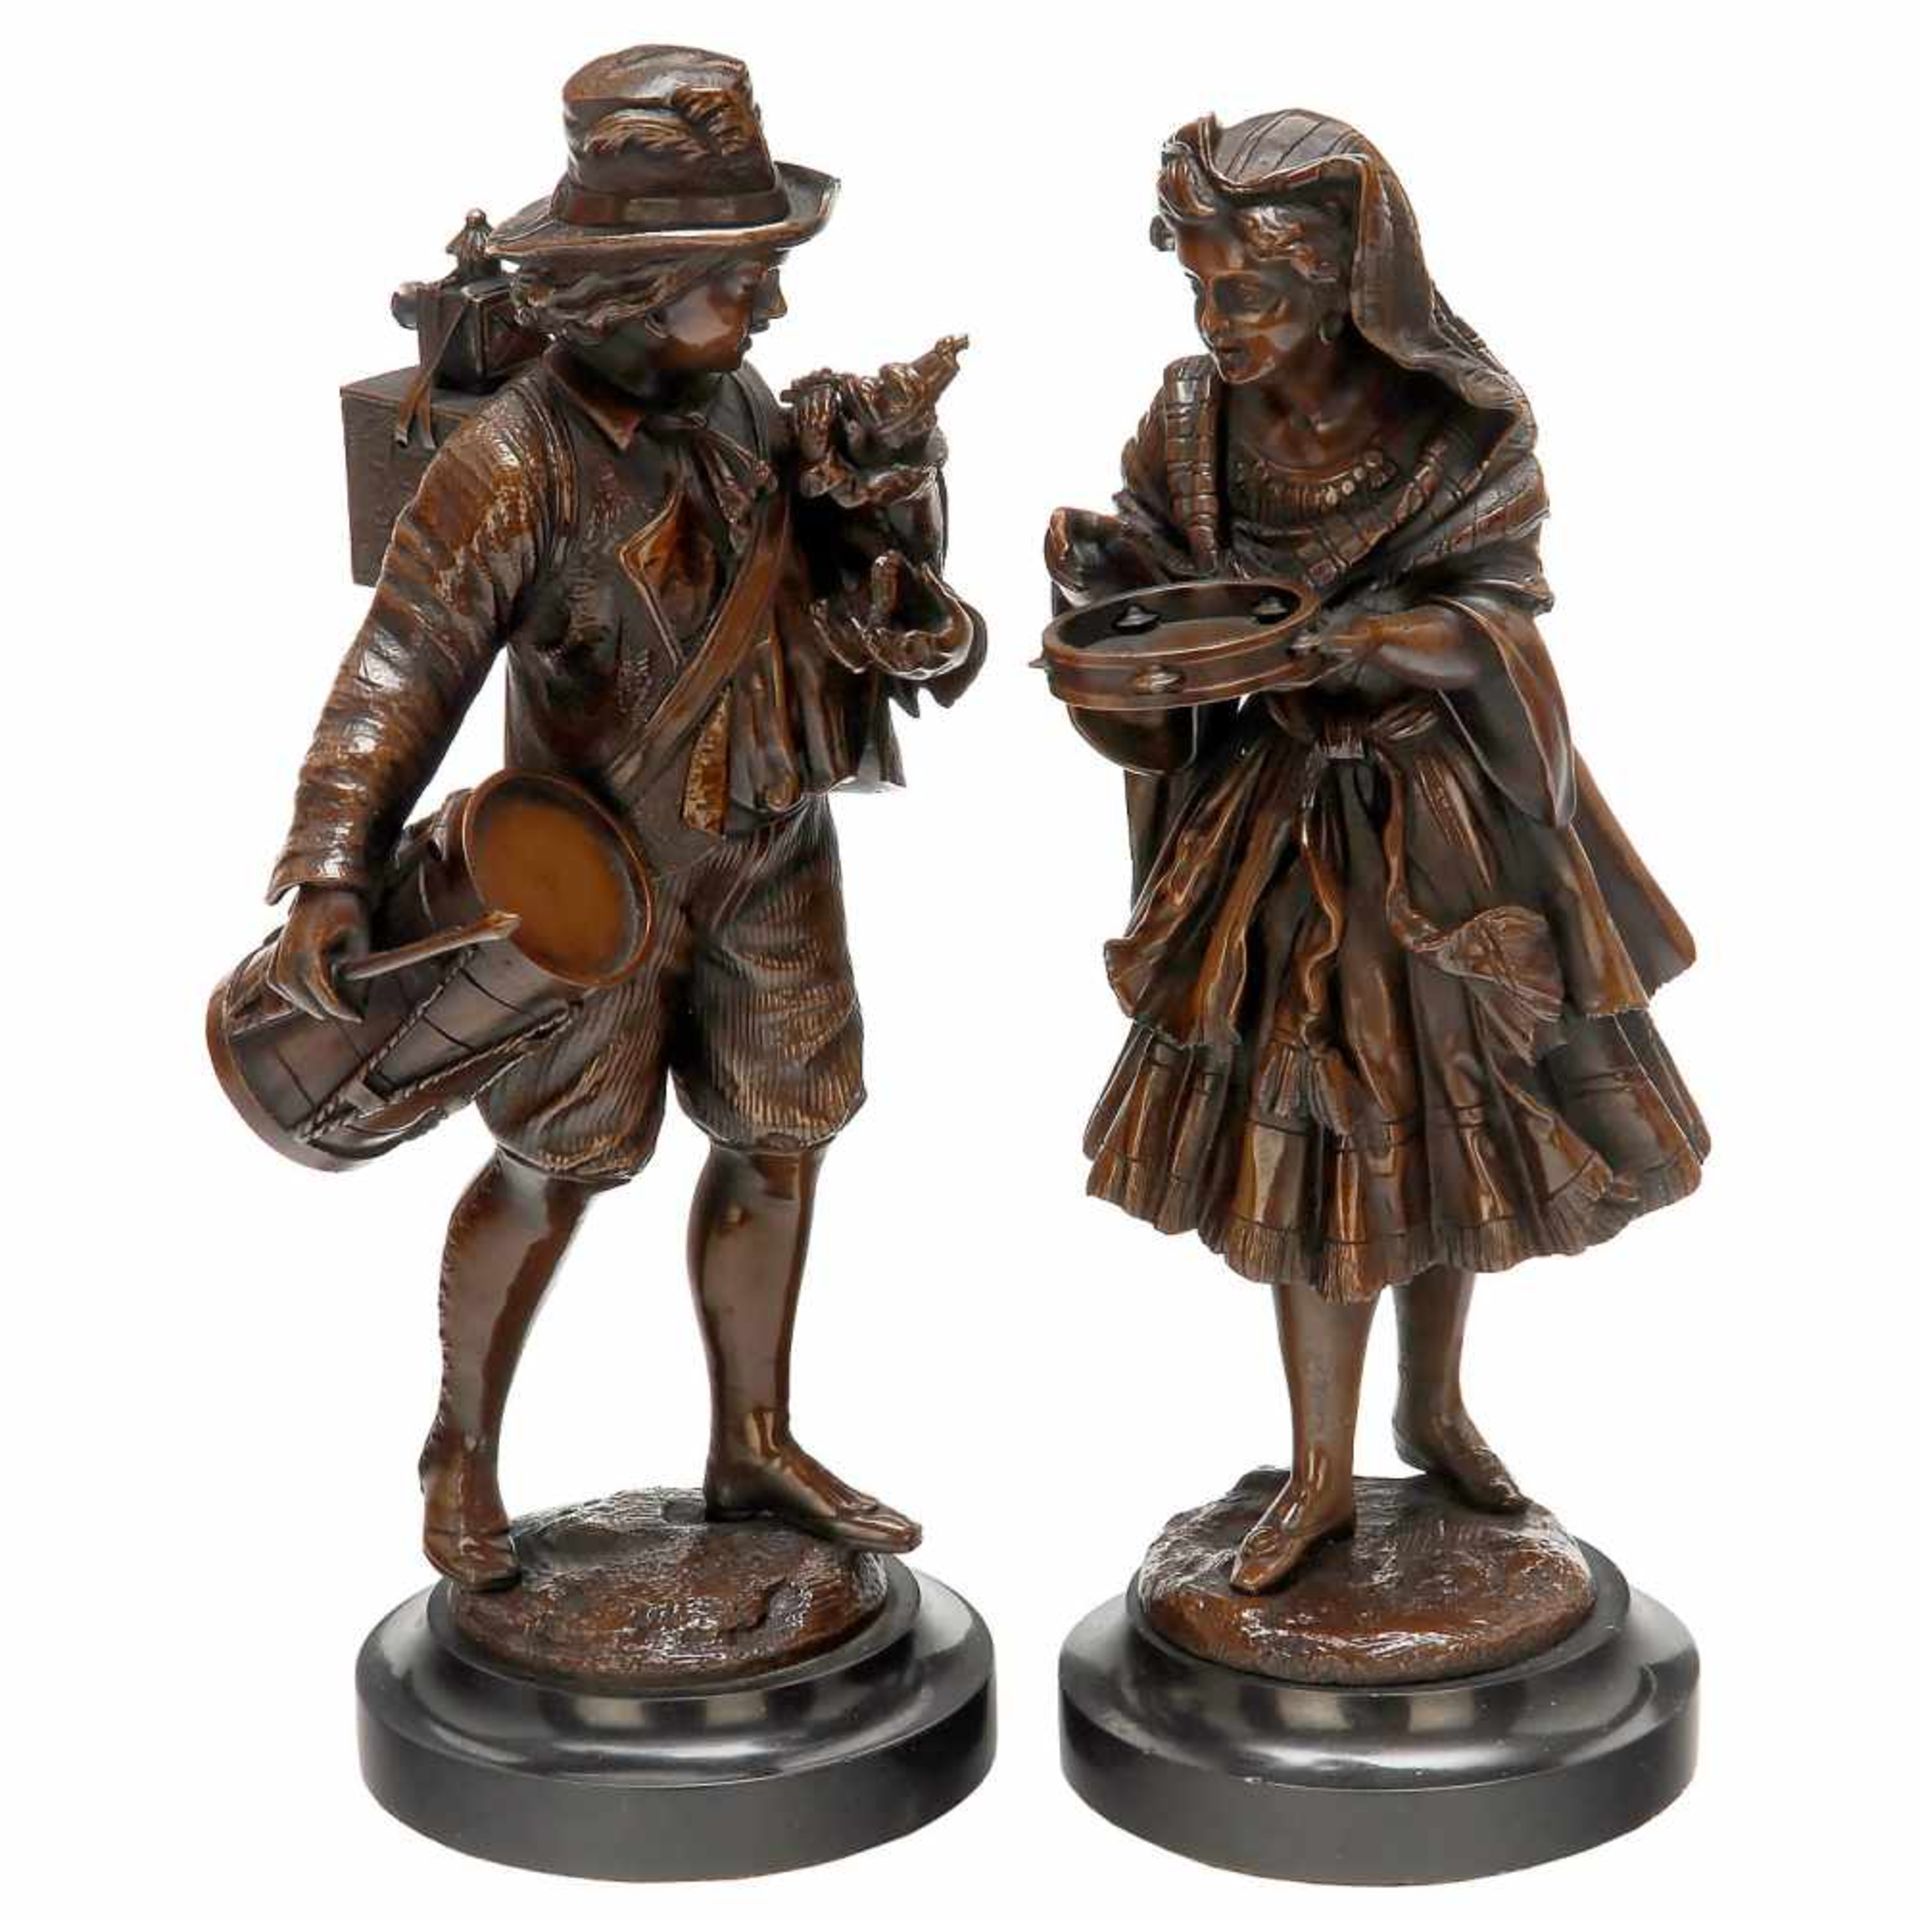 Pair of Bronze Lanternist Figures, Mid-19th CenturyDepicting a Savoyard showman with monkey and